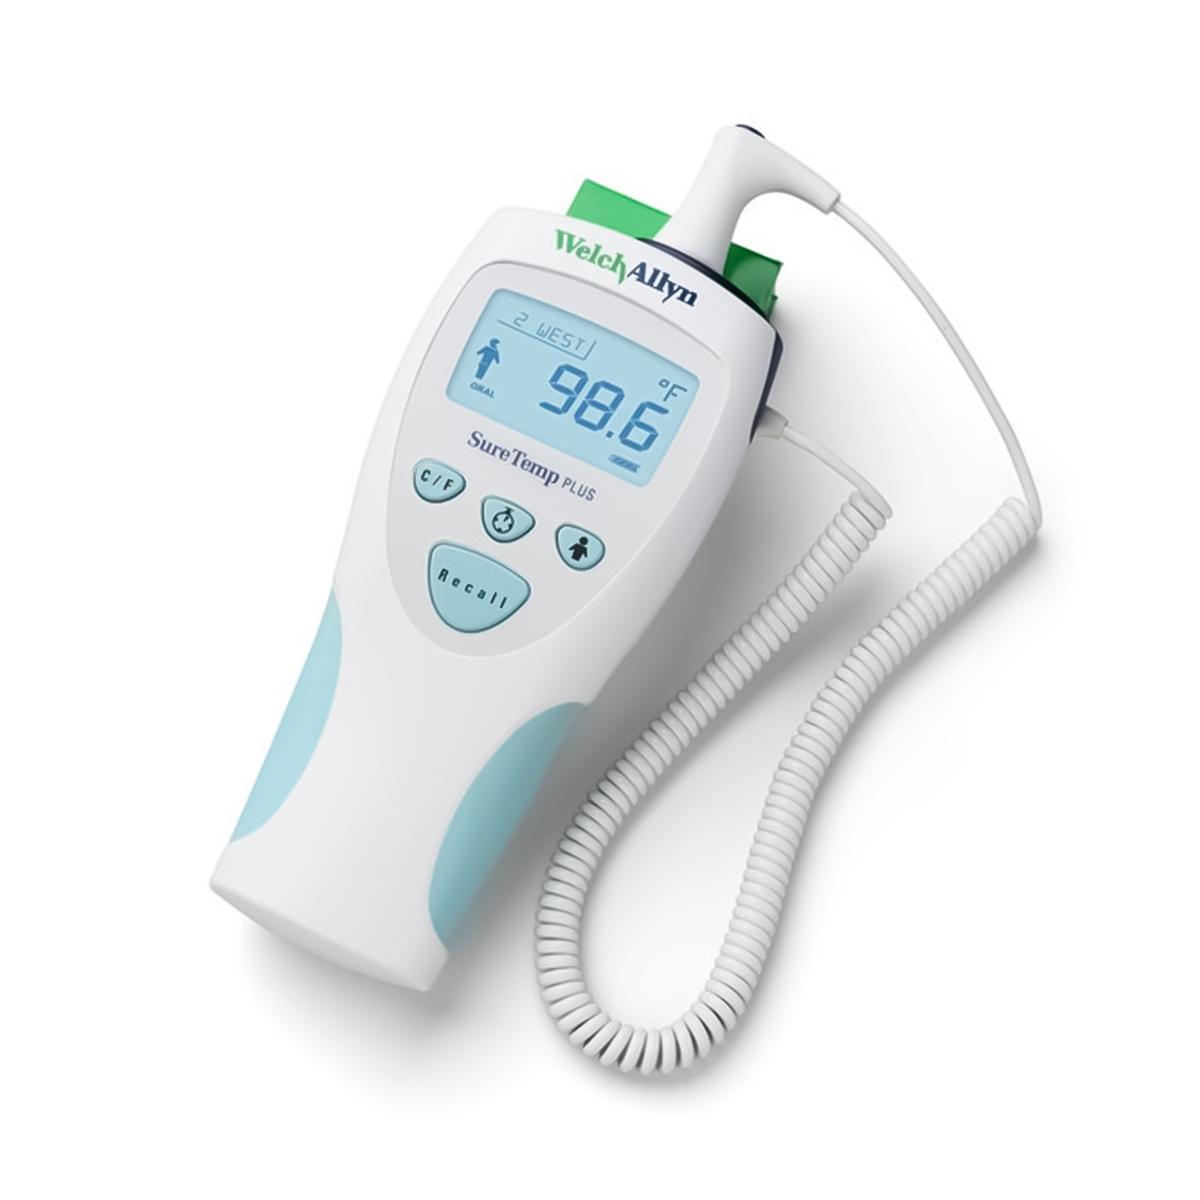 Welch Allyn SureTemp Plus 692 Wall-Mount Electronic Thermometer with Interchangeable Oral Probe Well Welch Allyn